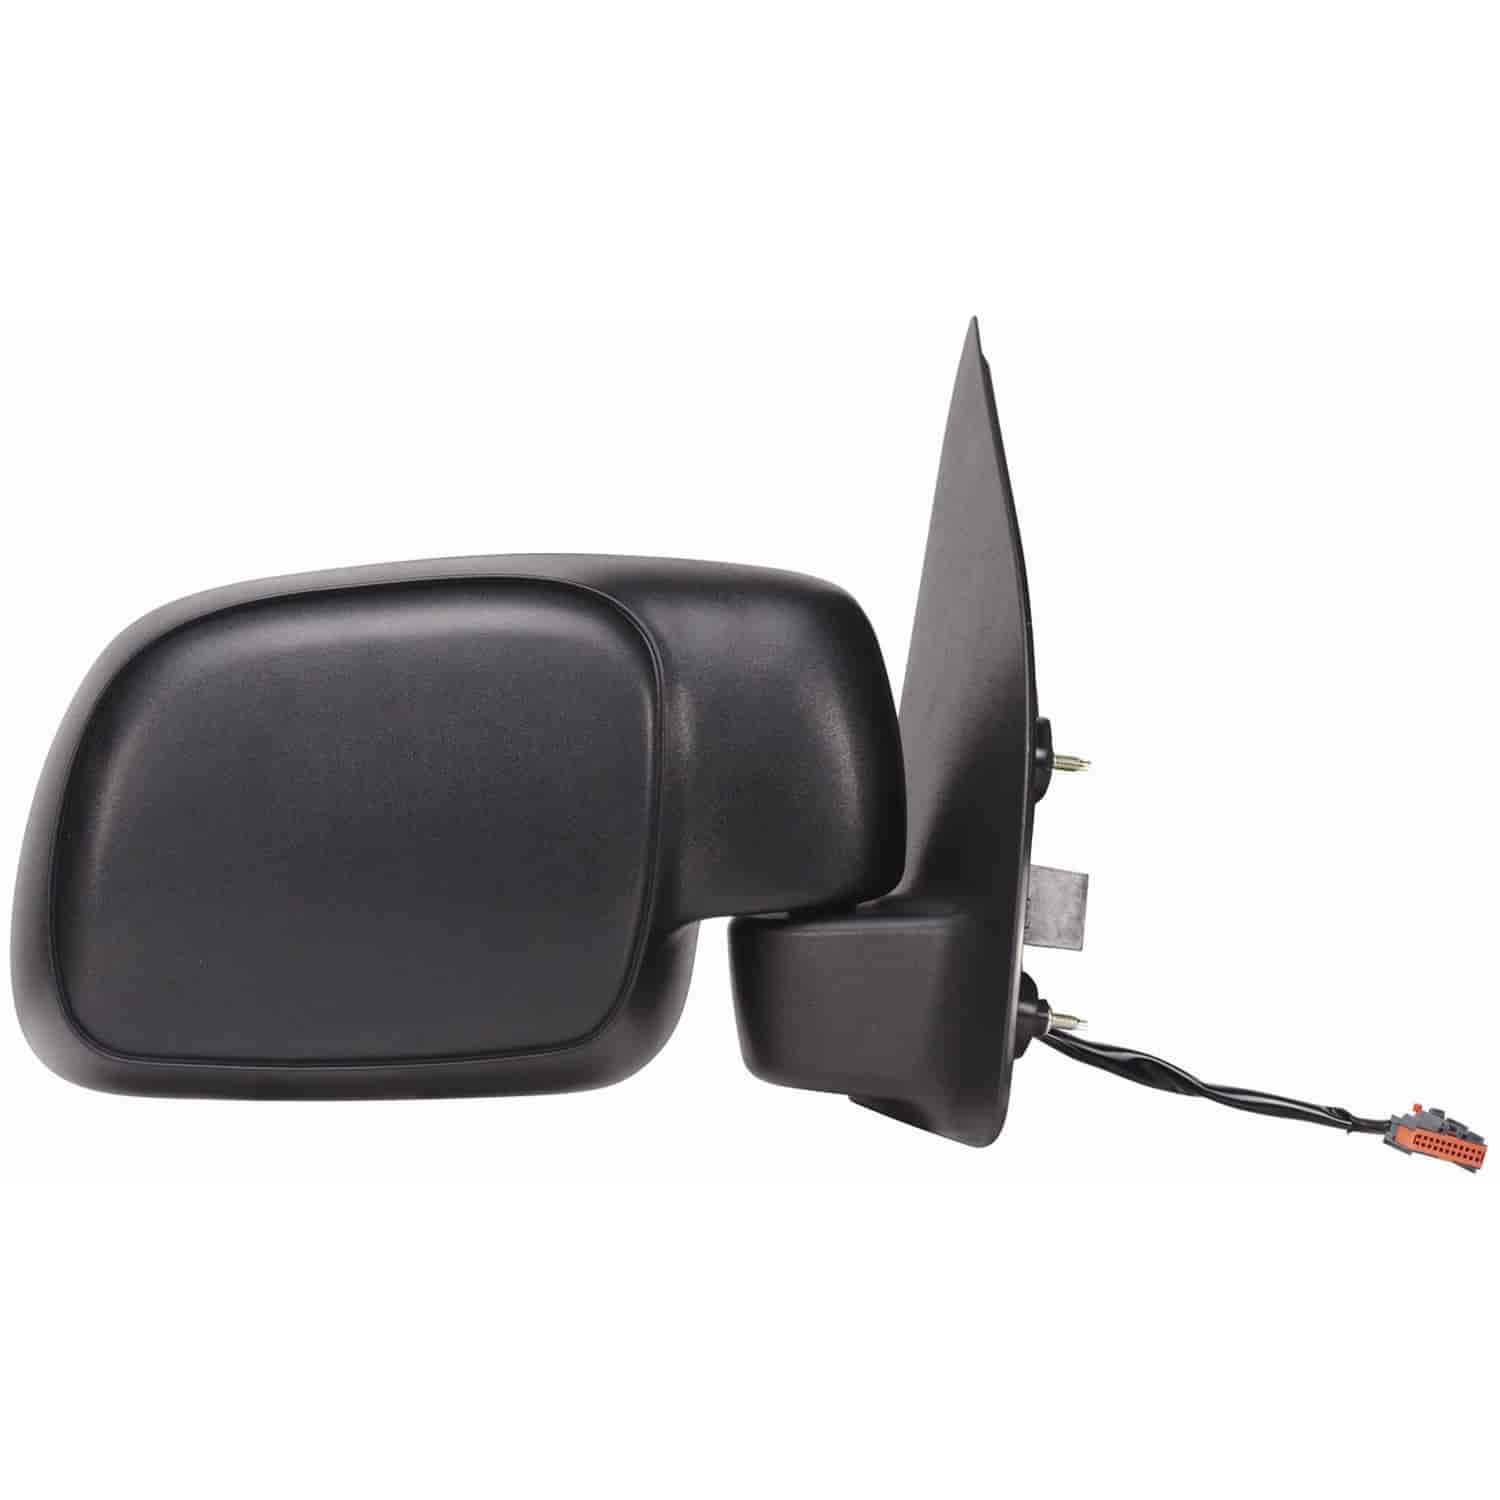 OEM Style Replacement mirror for 08-11 Ford F250/